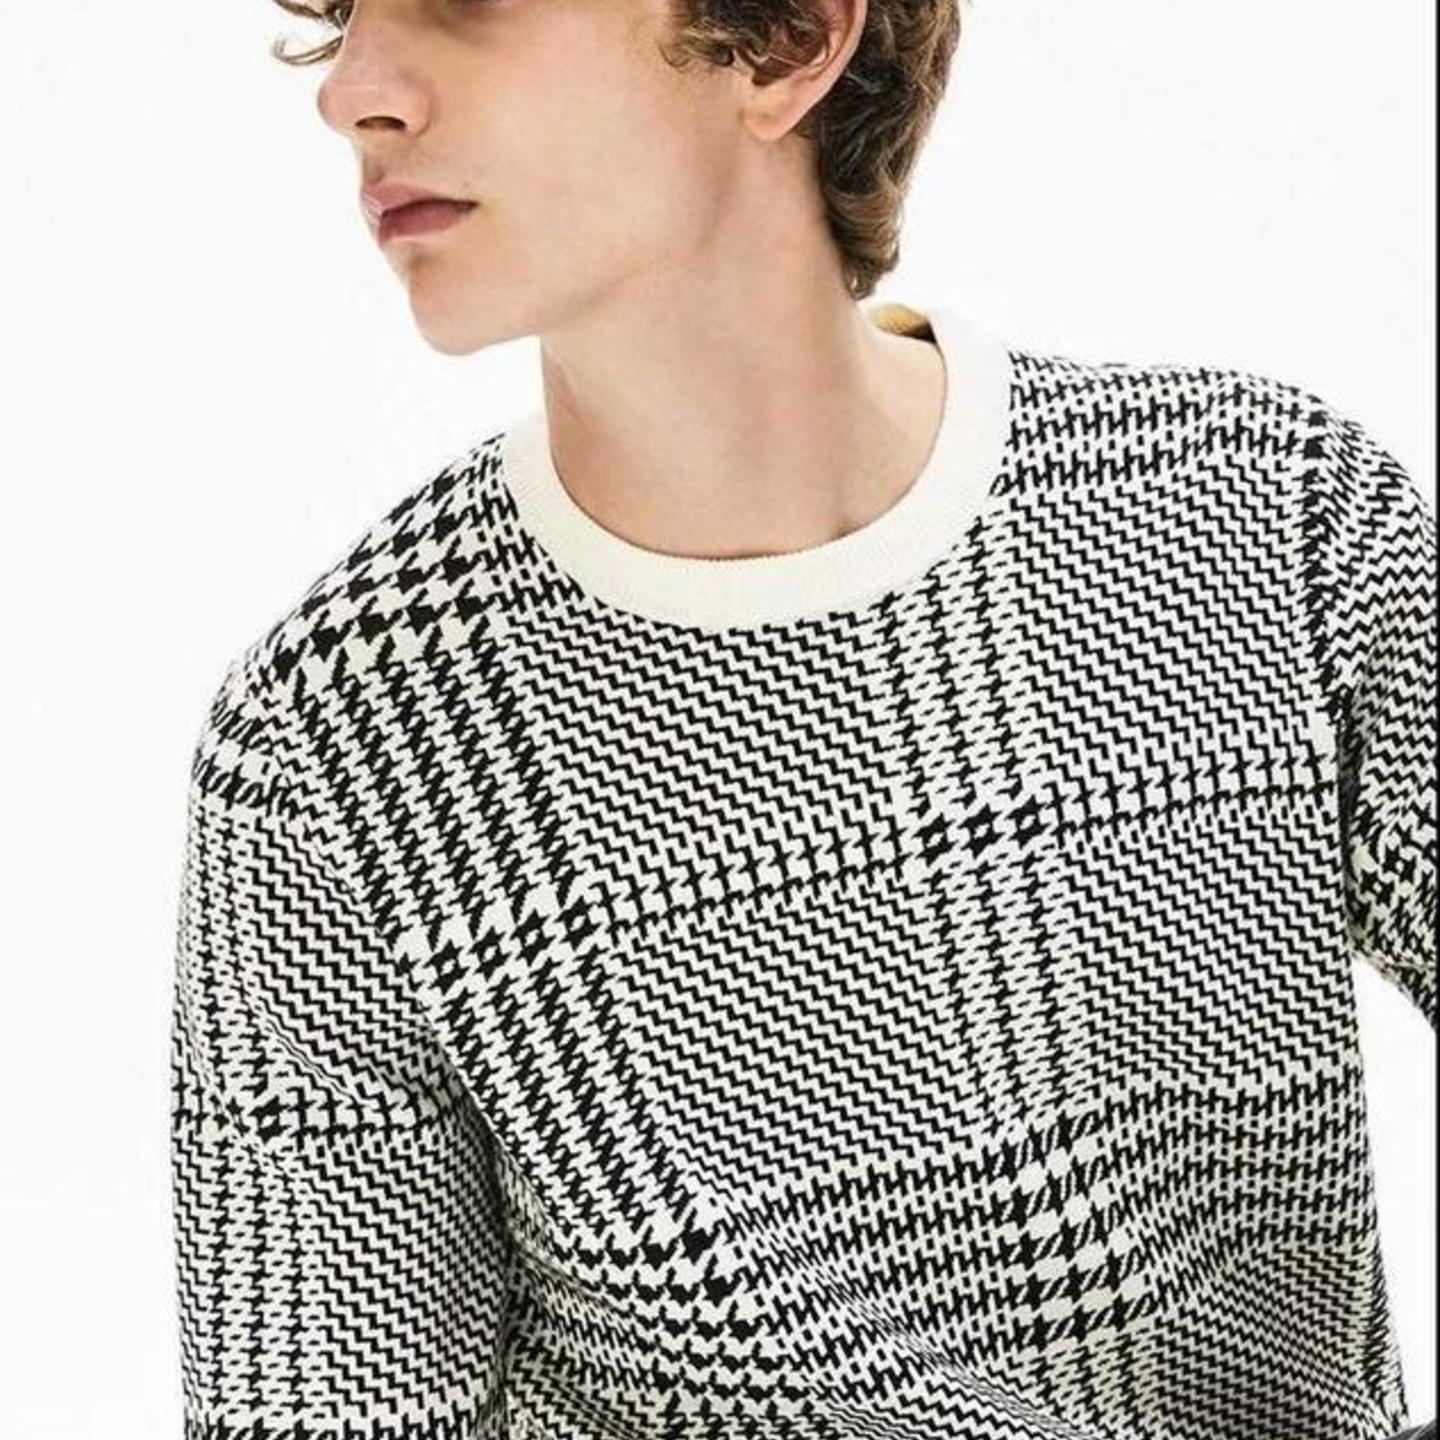 Lacoste Crewneck Houndstooth Cotton And Cashmere Sweater